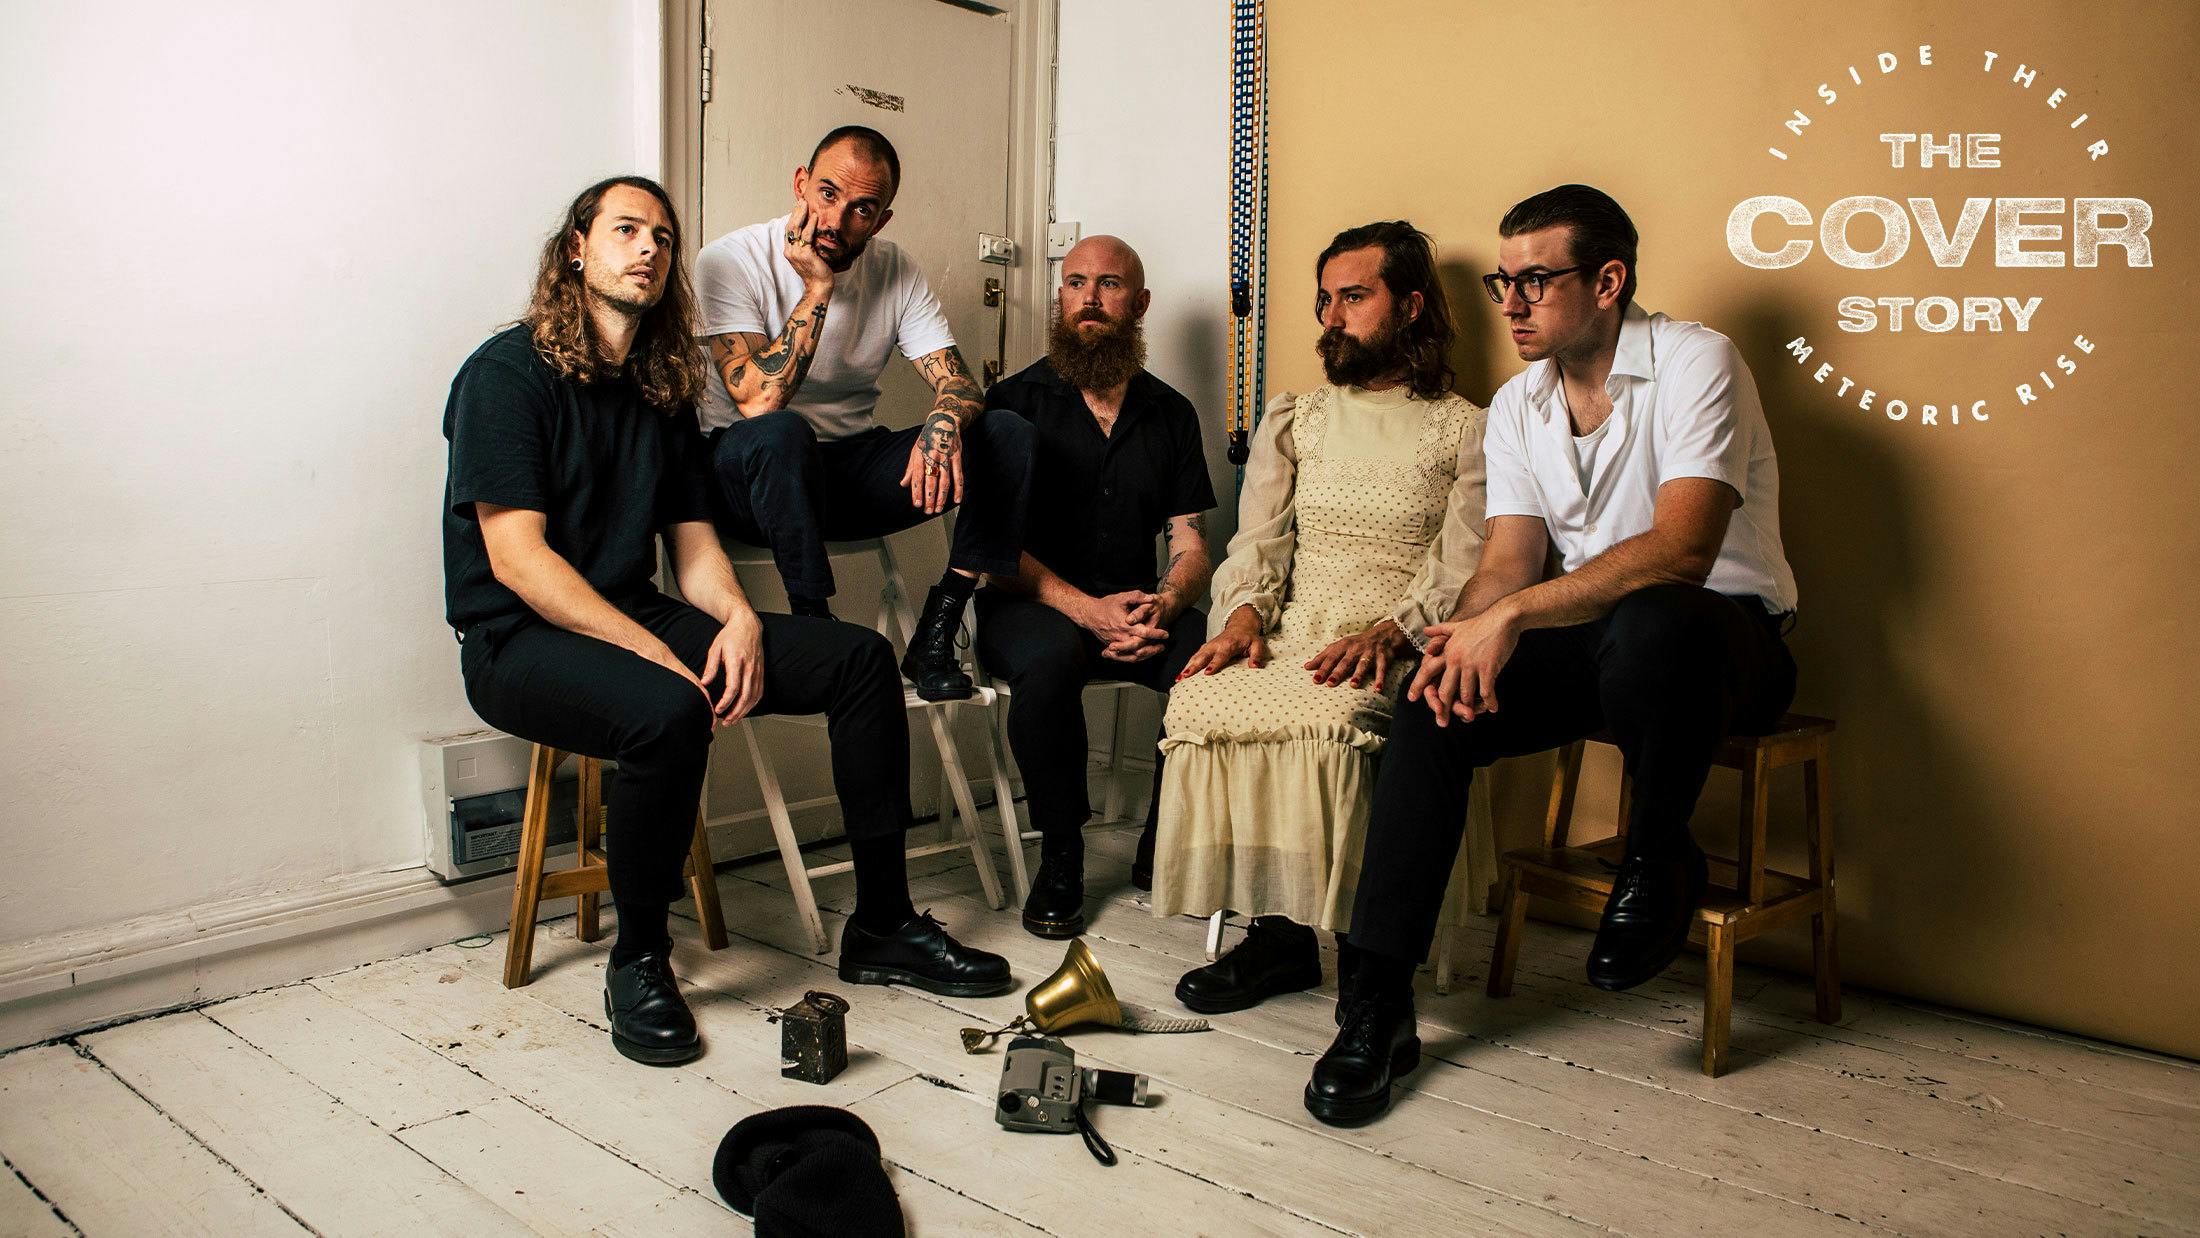 IDLES: The rise and rise of Britain’s unlikely rock heroes